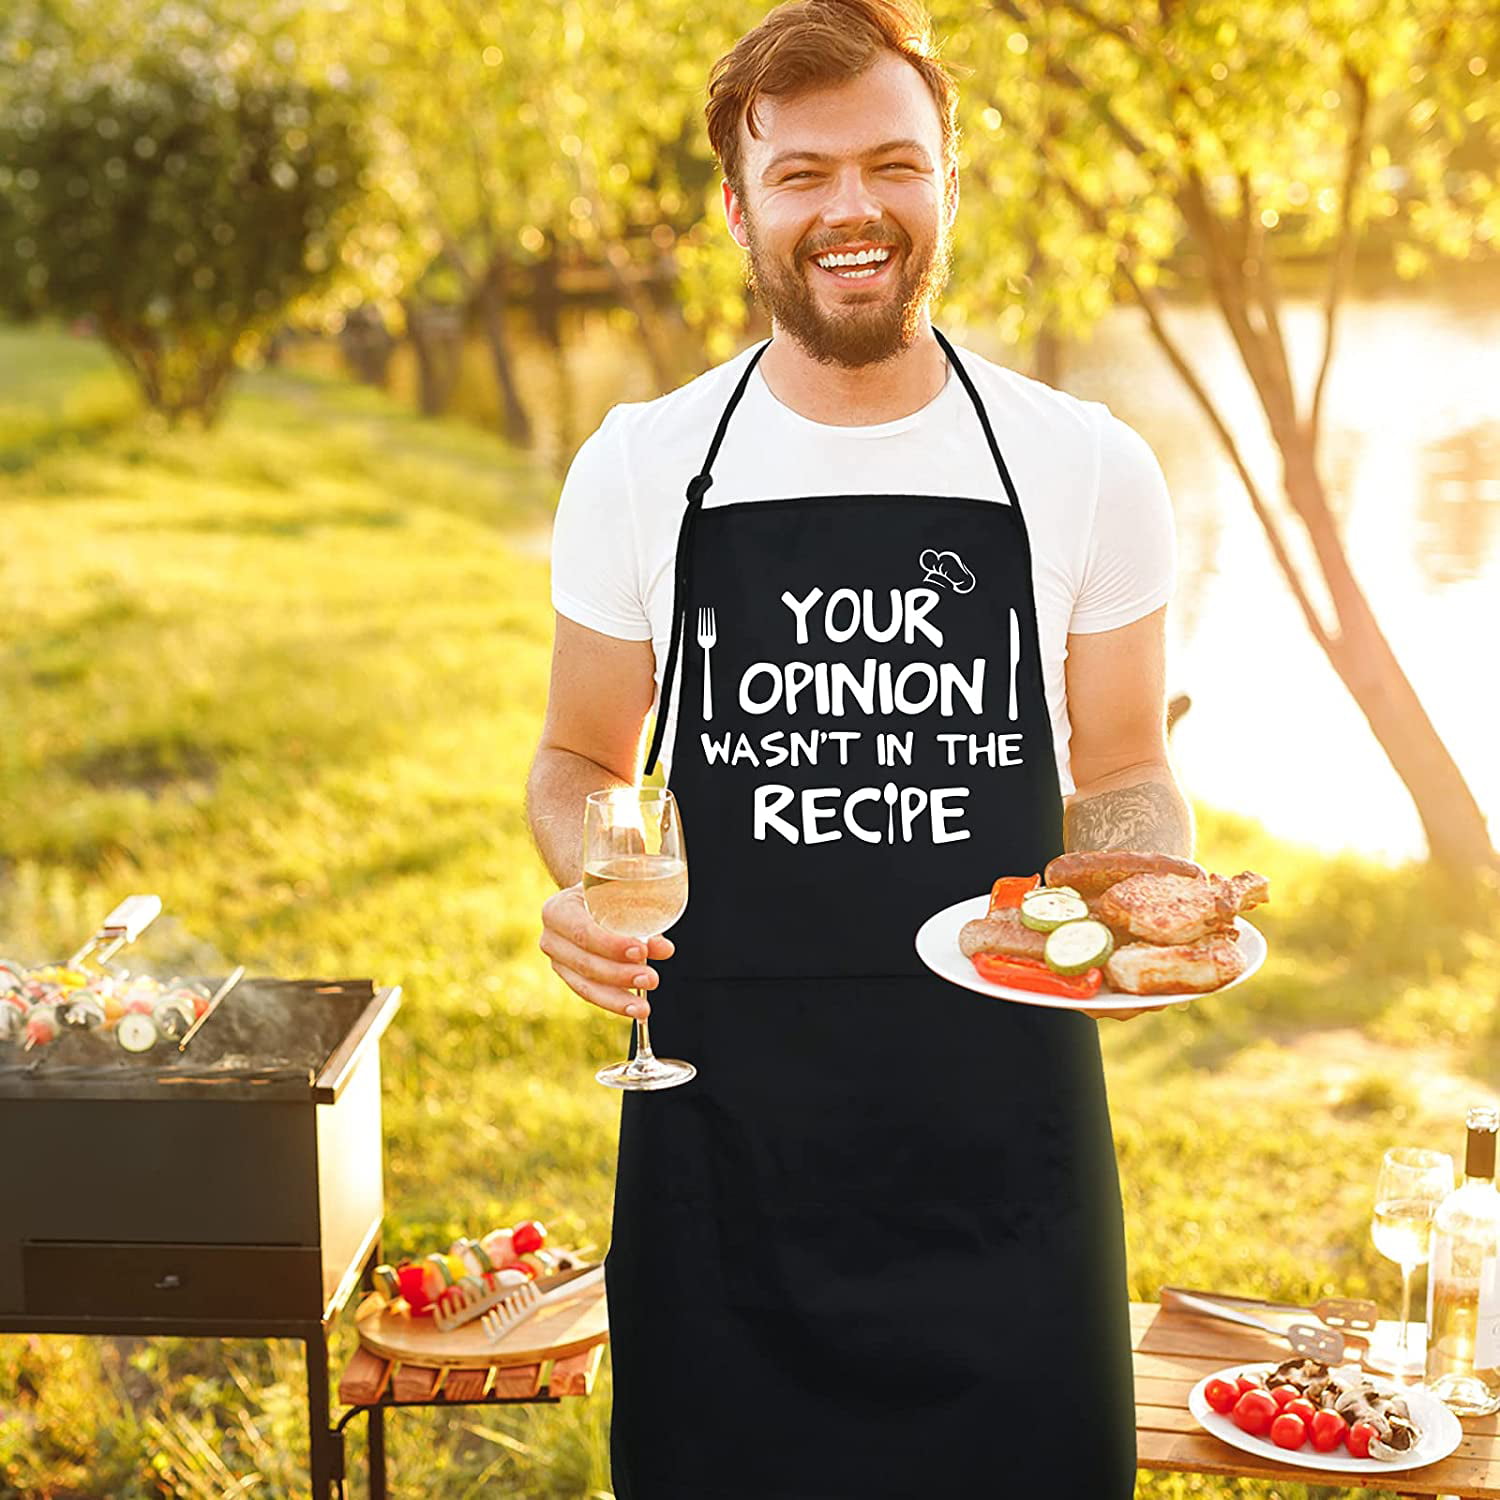 Your Opinion Was Not In My Recipe Funny Chef Gifts For Women Men